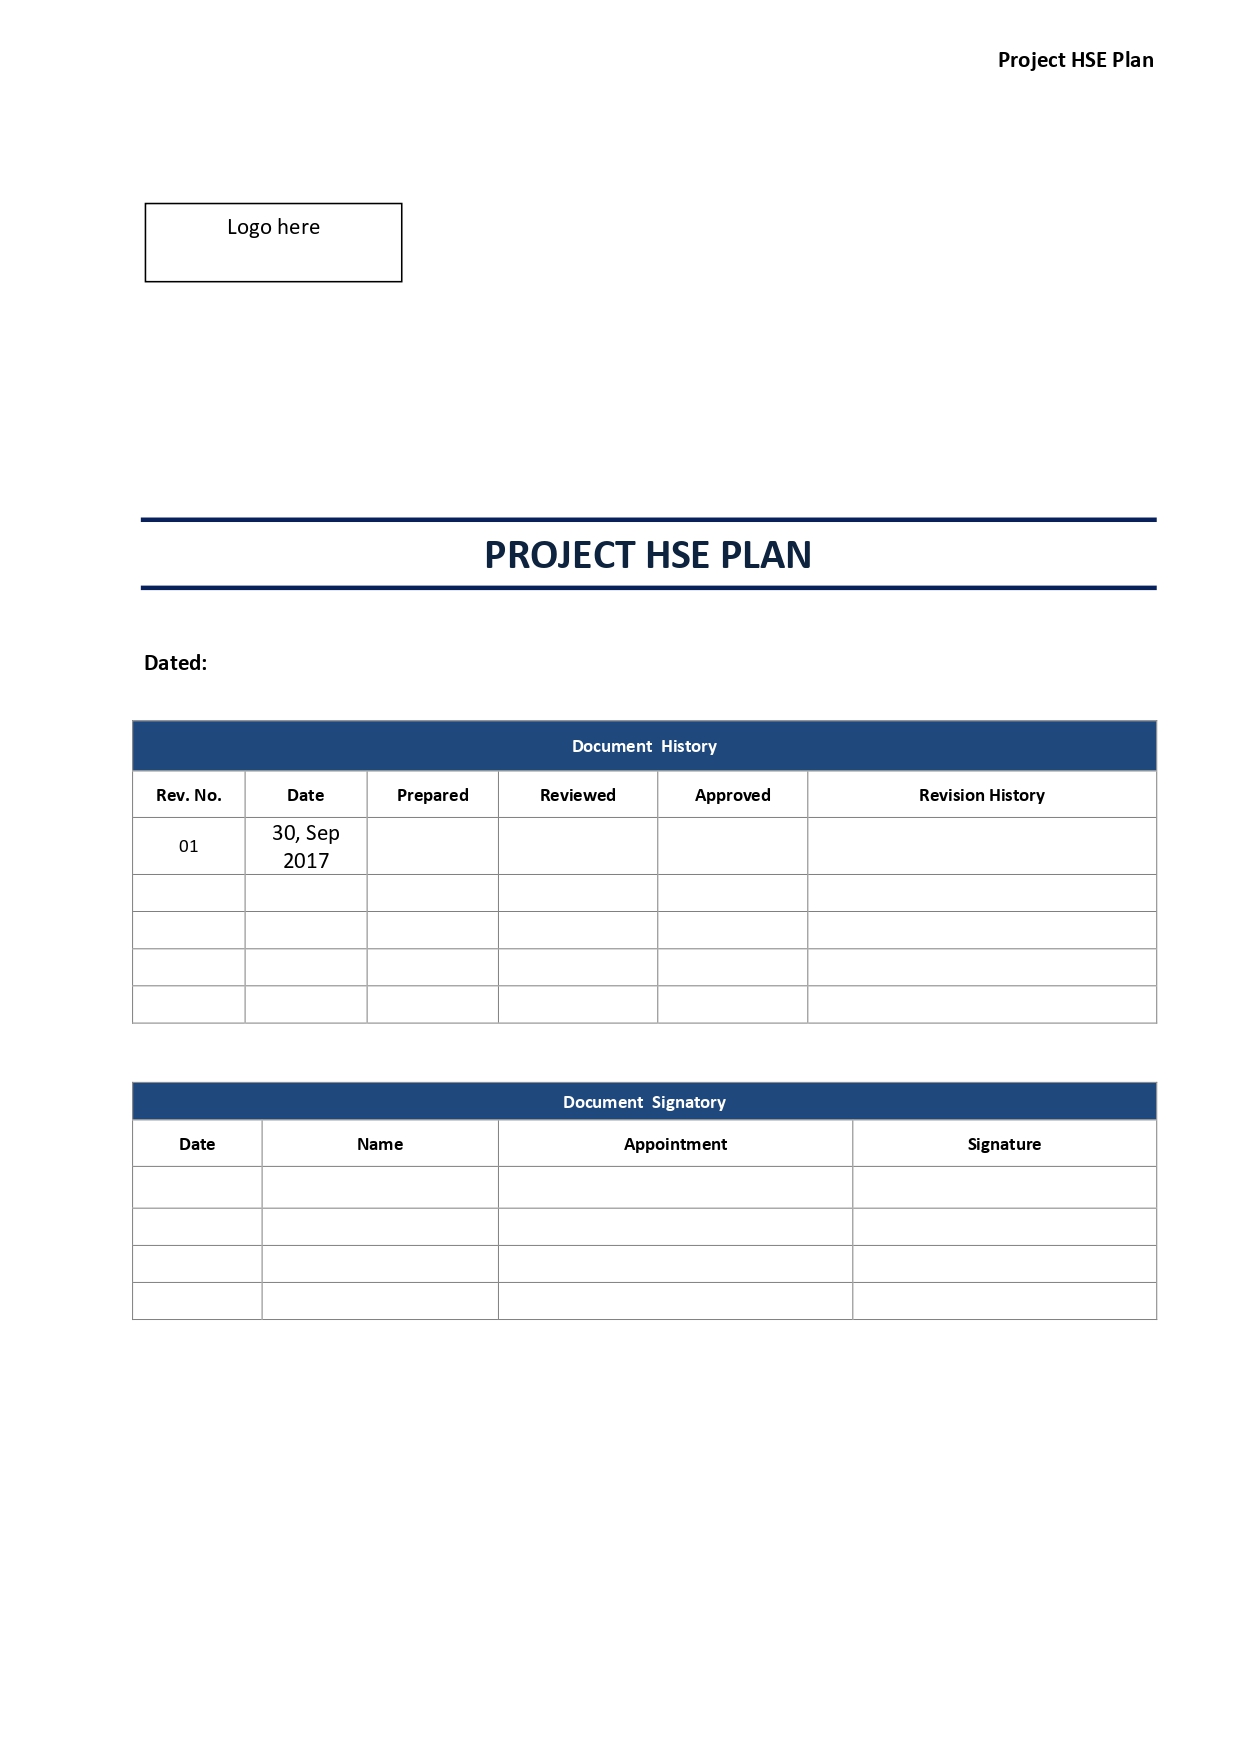 Project HSE Plan hsefiles com